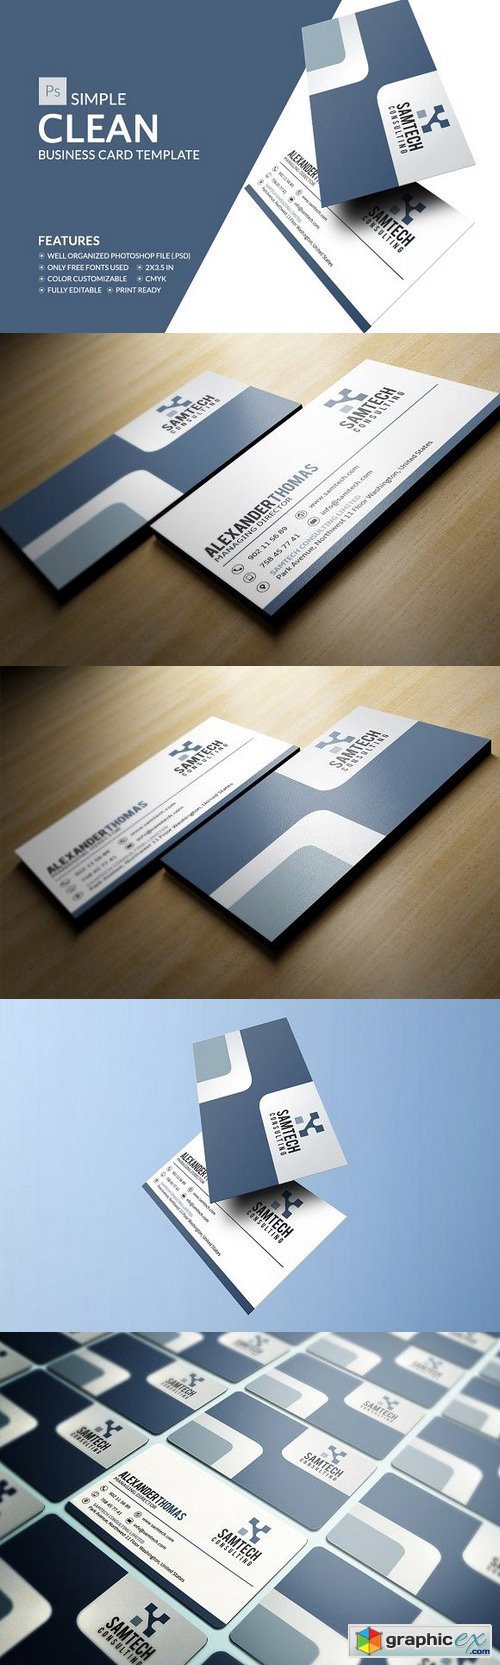 Simple Clean Business Card 1163840